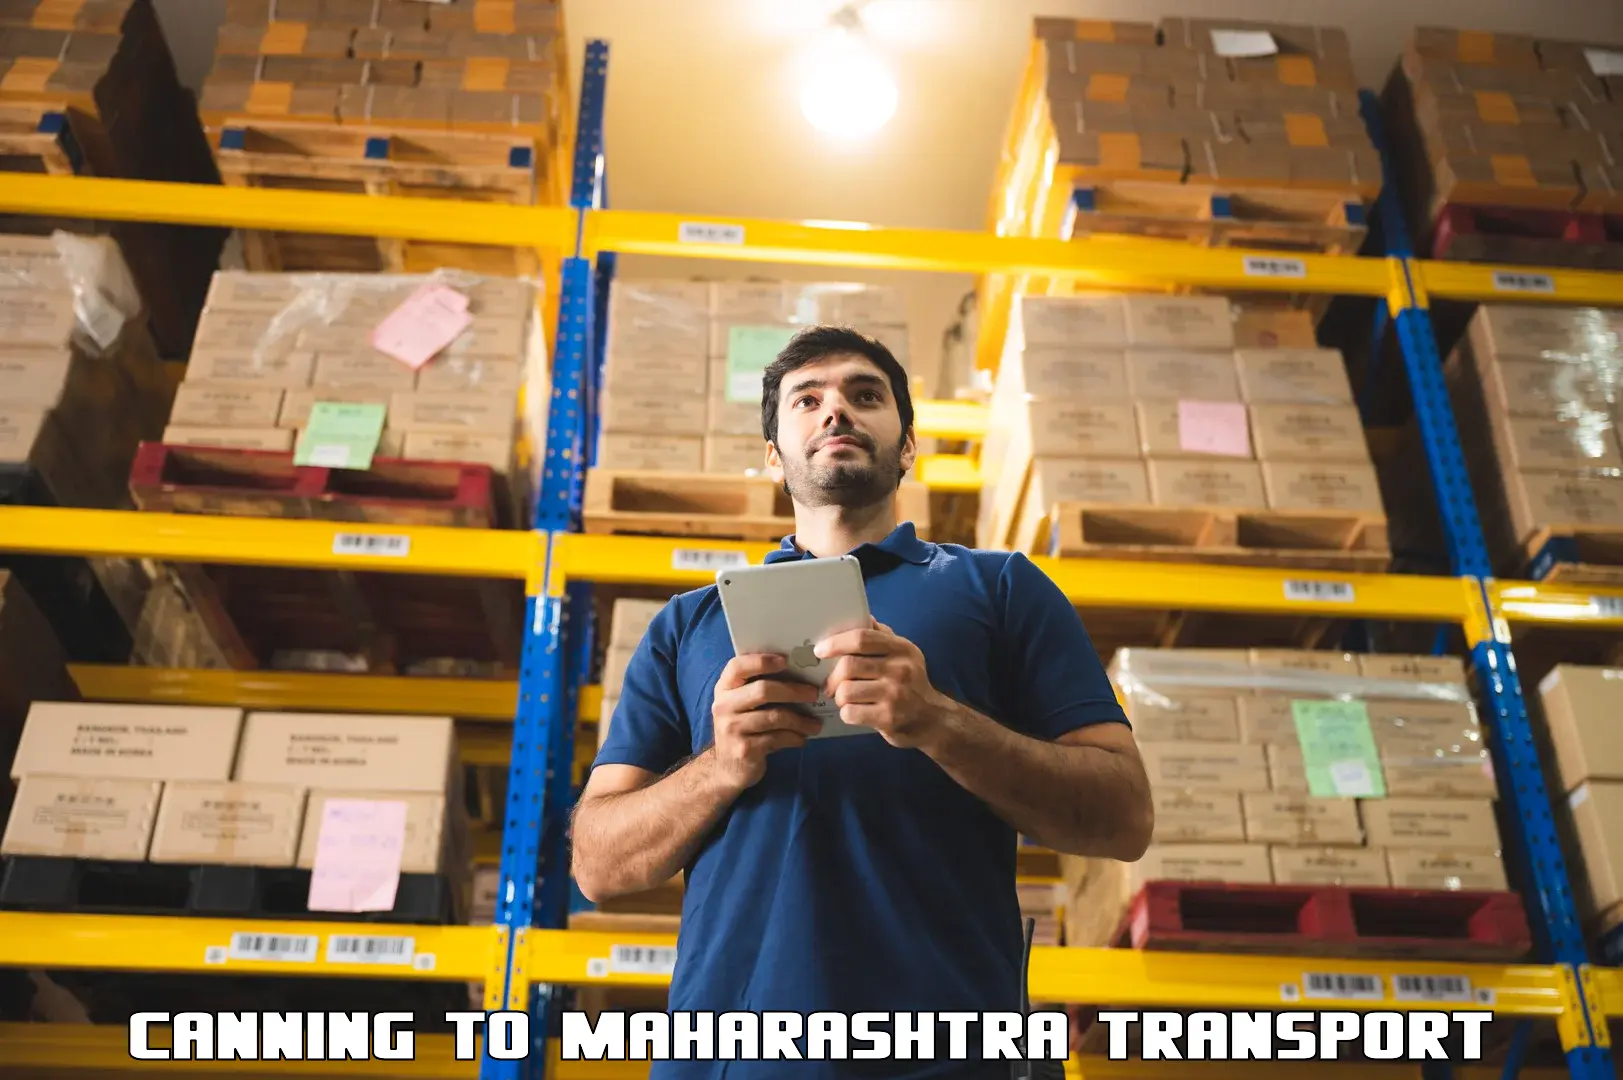 Road transport online services Canning to Maharashtra